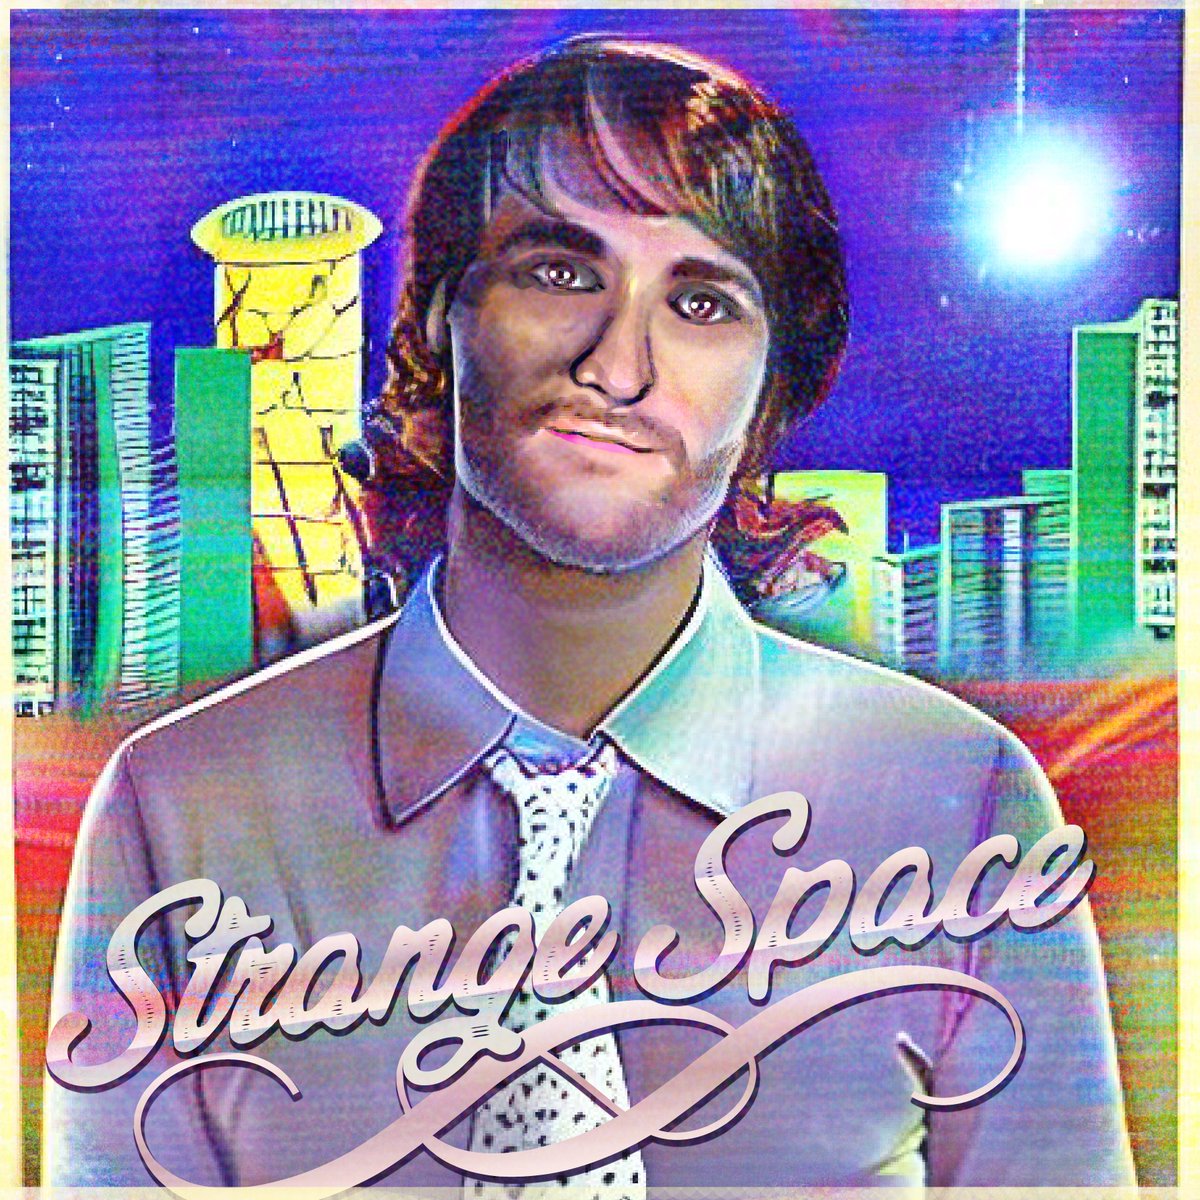 HNY WLSN's new single 'Strange Space' is coming out soon. Only track on the record I didn't produce/mix, but I mastered the final result AND painted a digital portrait of the homie @HNY_WLSN for the release. Stay tuned!!! @savrmusic #digitalpainting #NewMusic #portrait #art